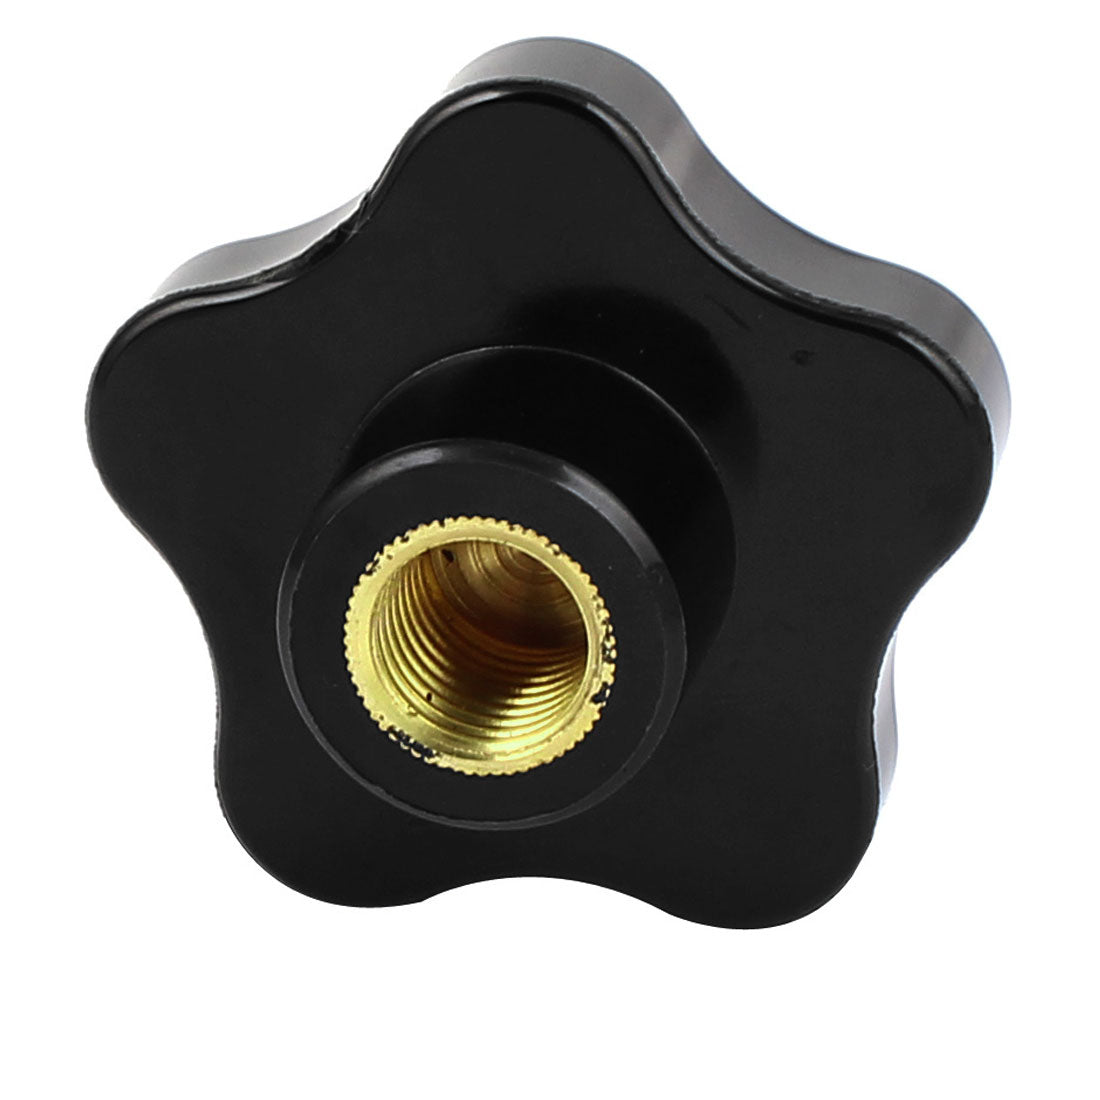 uxcell Uxcell M16 Female Threaded Plastic Star Design Head Clamping Screw Nuts Knob Handle Handgrip